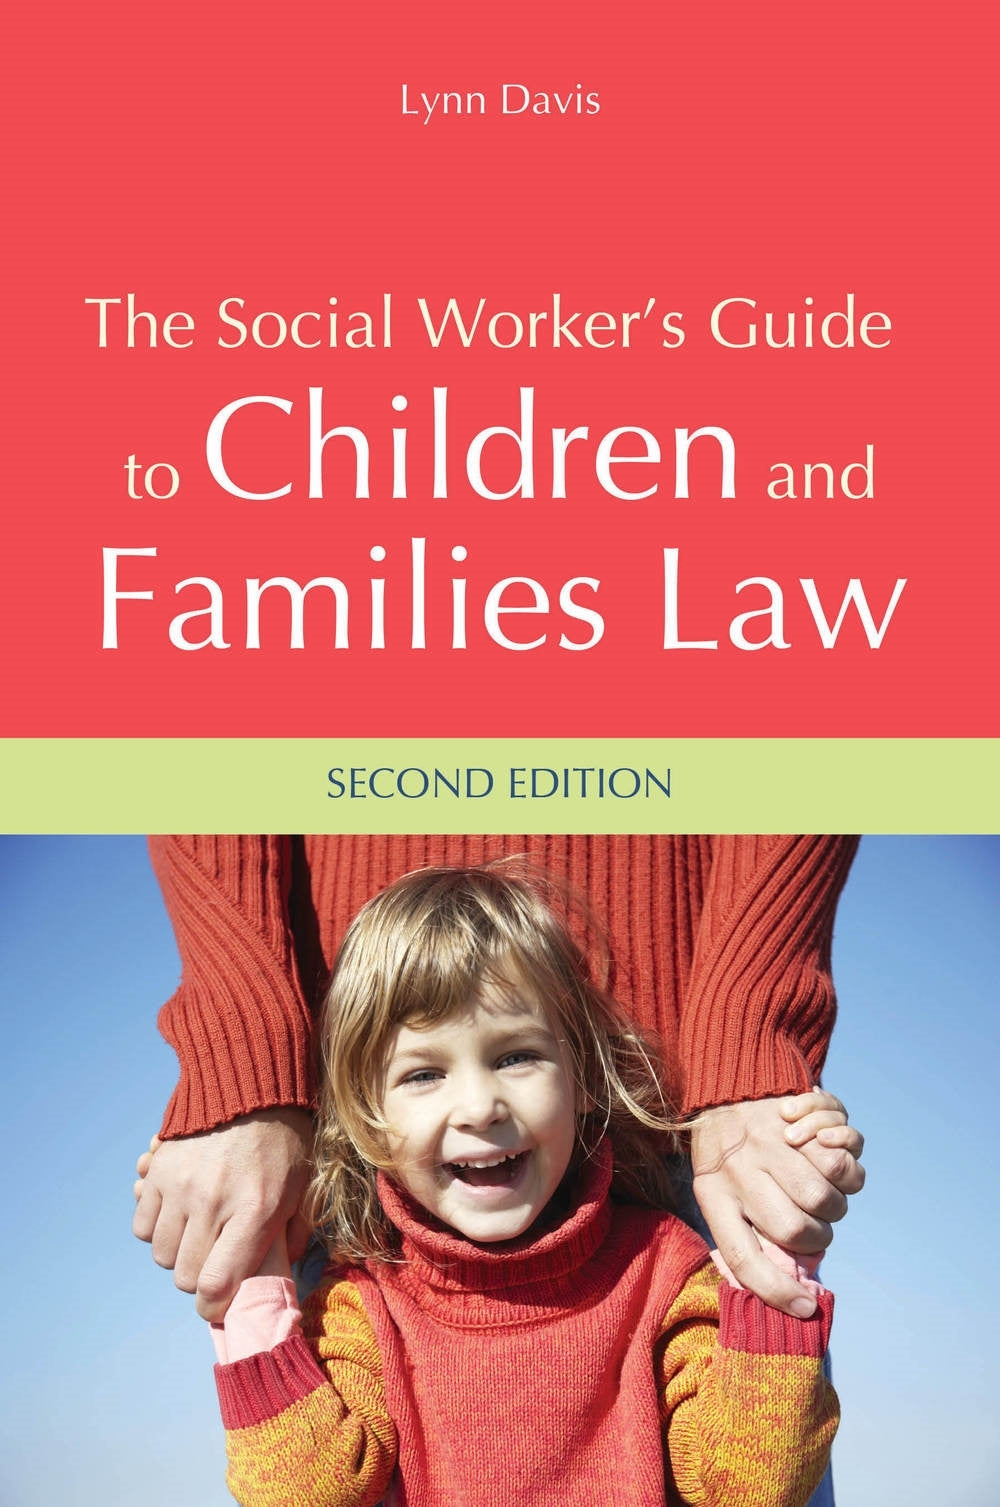 The Social Worker's Guide to Children and Families Law by Lynn Davis